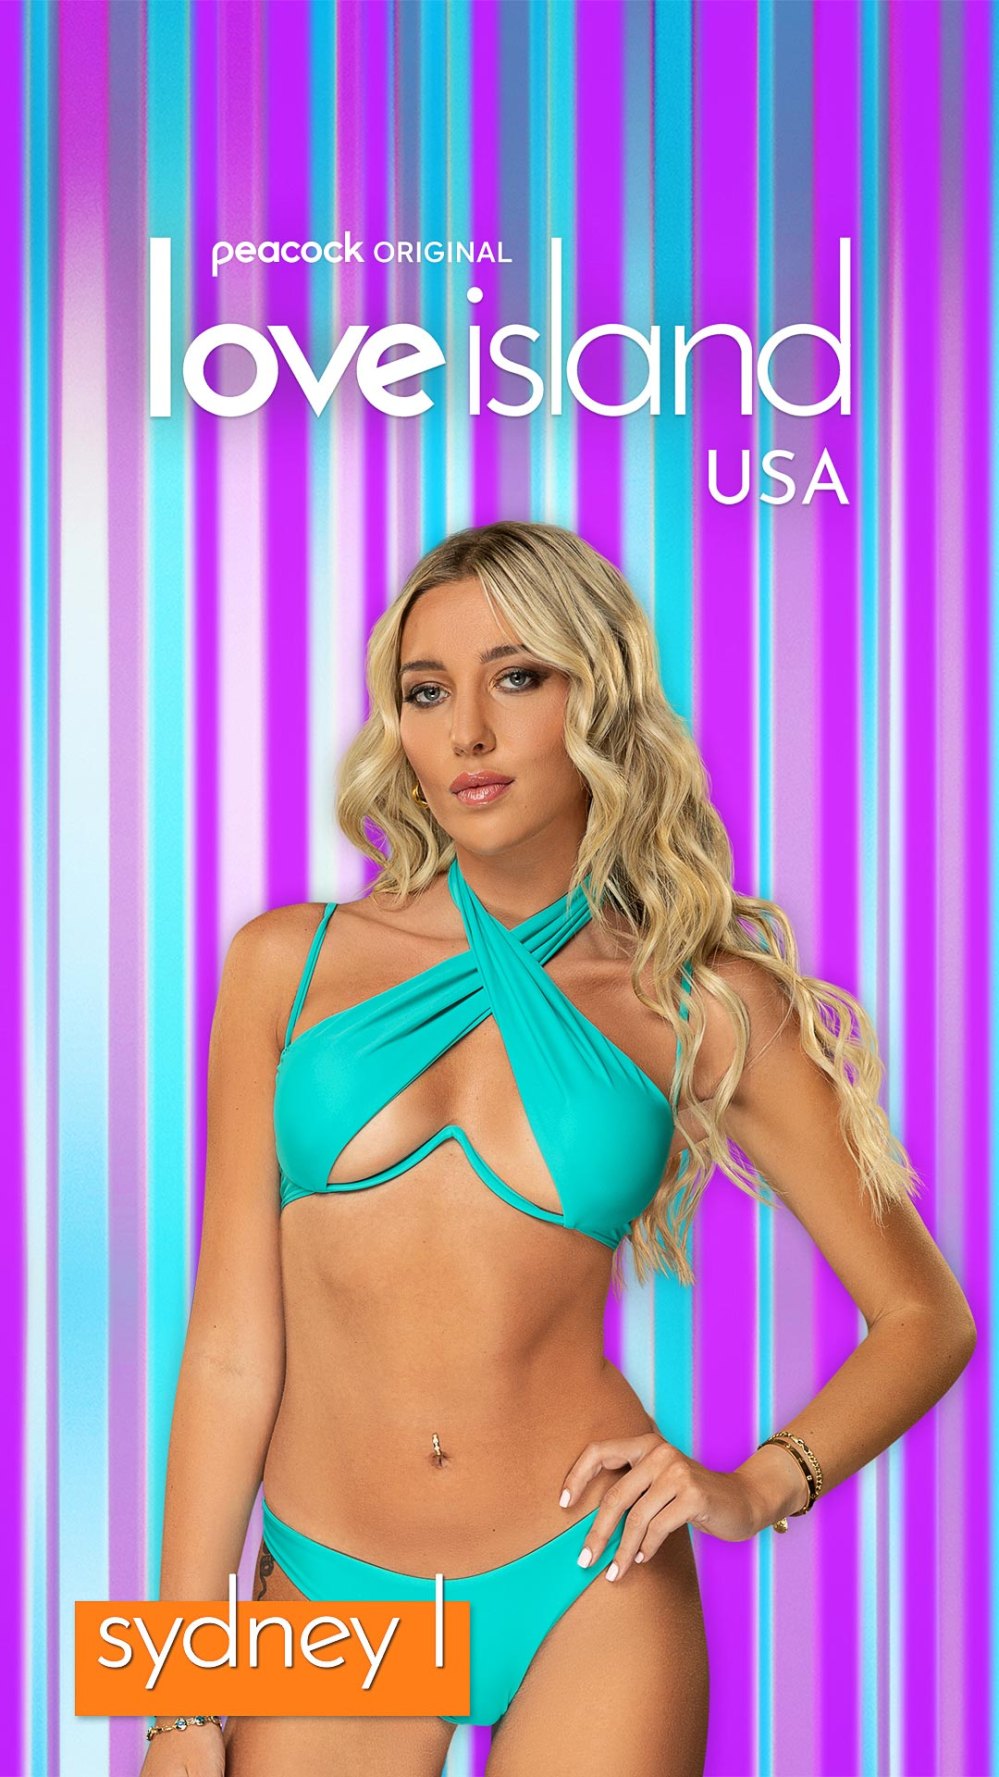 Check out the new Love Island USA season 6 bombshells coming to Casa Amor LoveIsland_S6_SYDNEY L_CharacterPortrait_1080x1920_Text 125